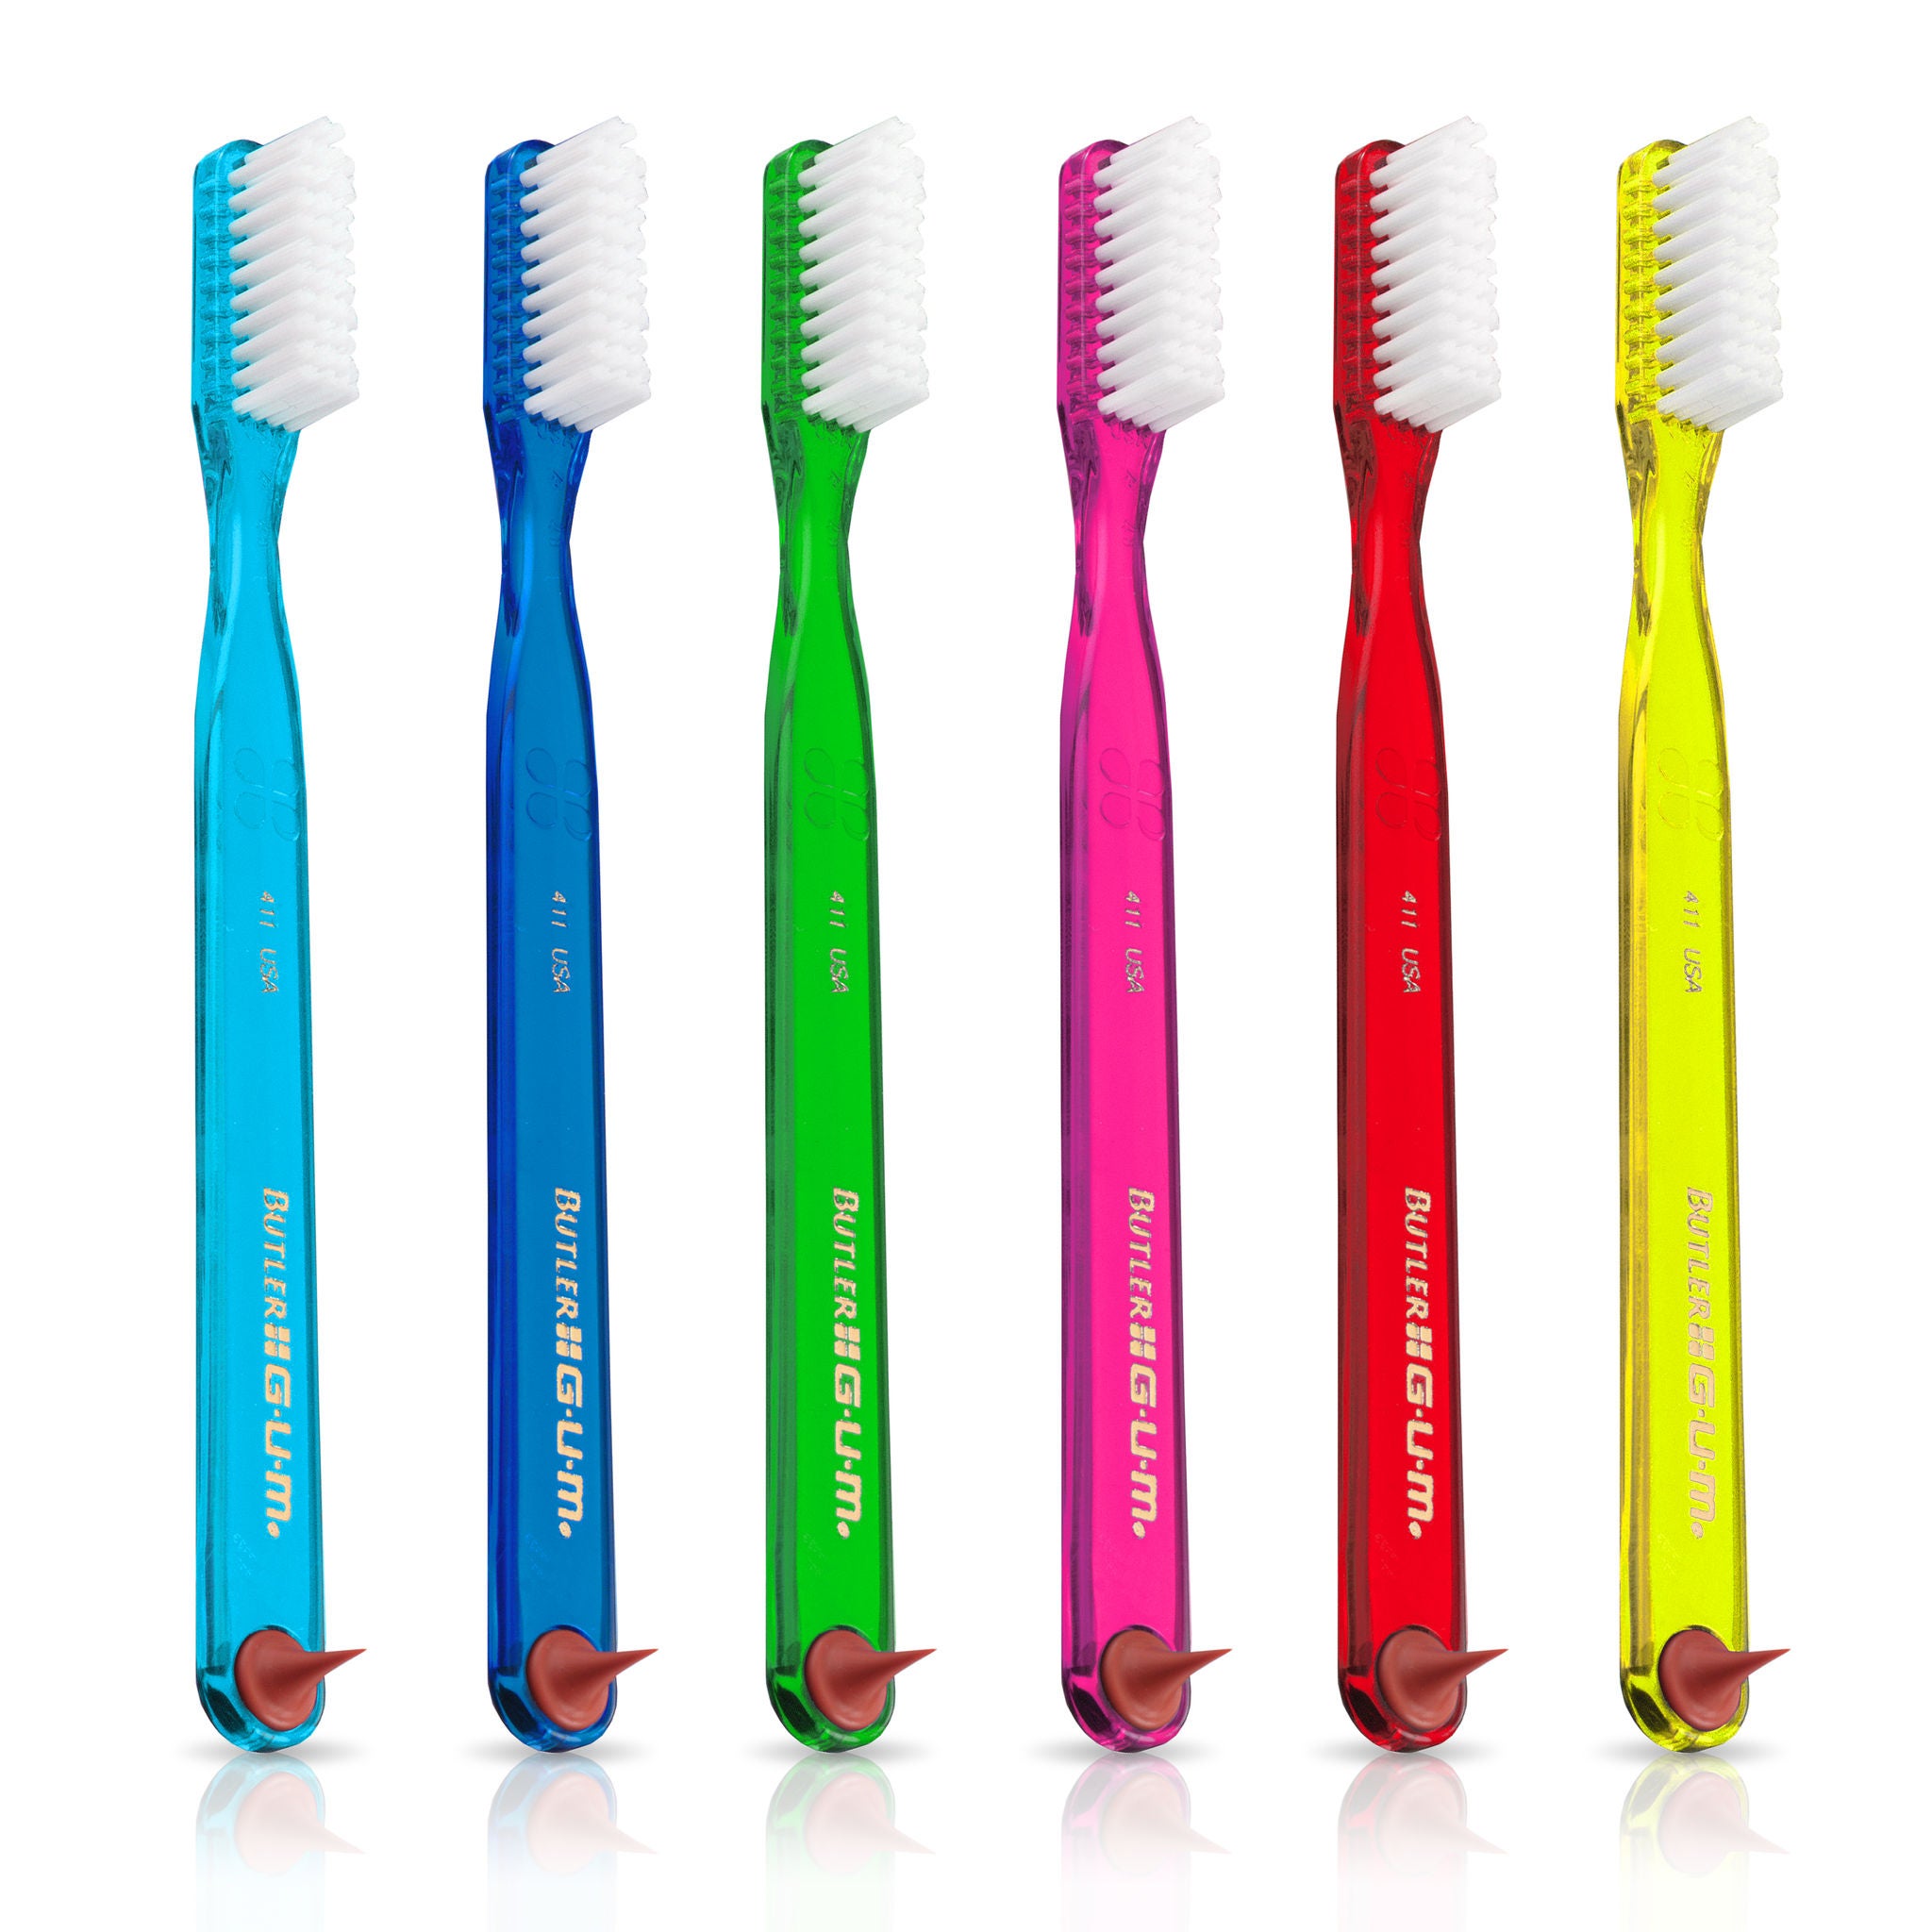 411-Product-Toothbrush-Classic-naked-6colors.jpg